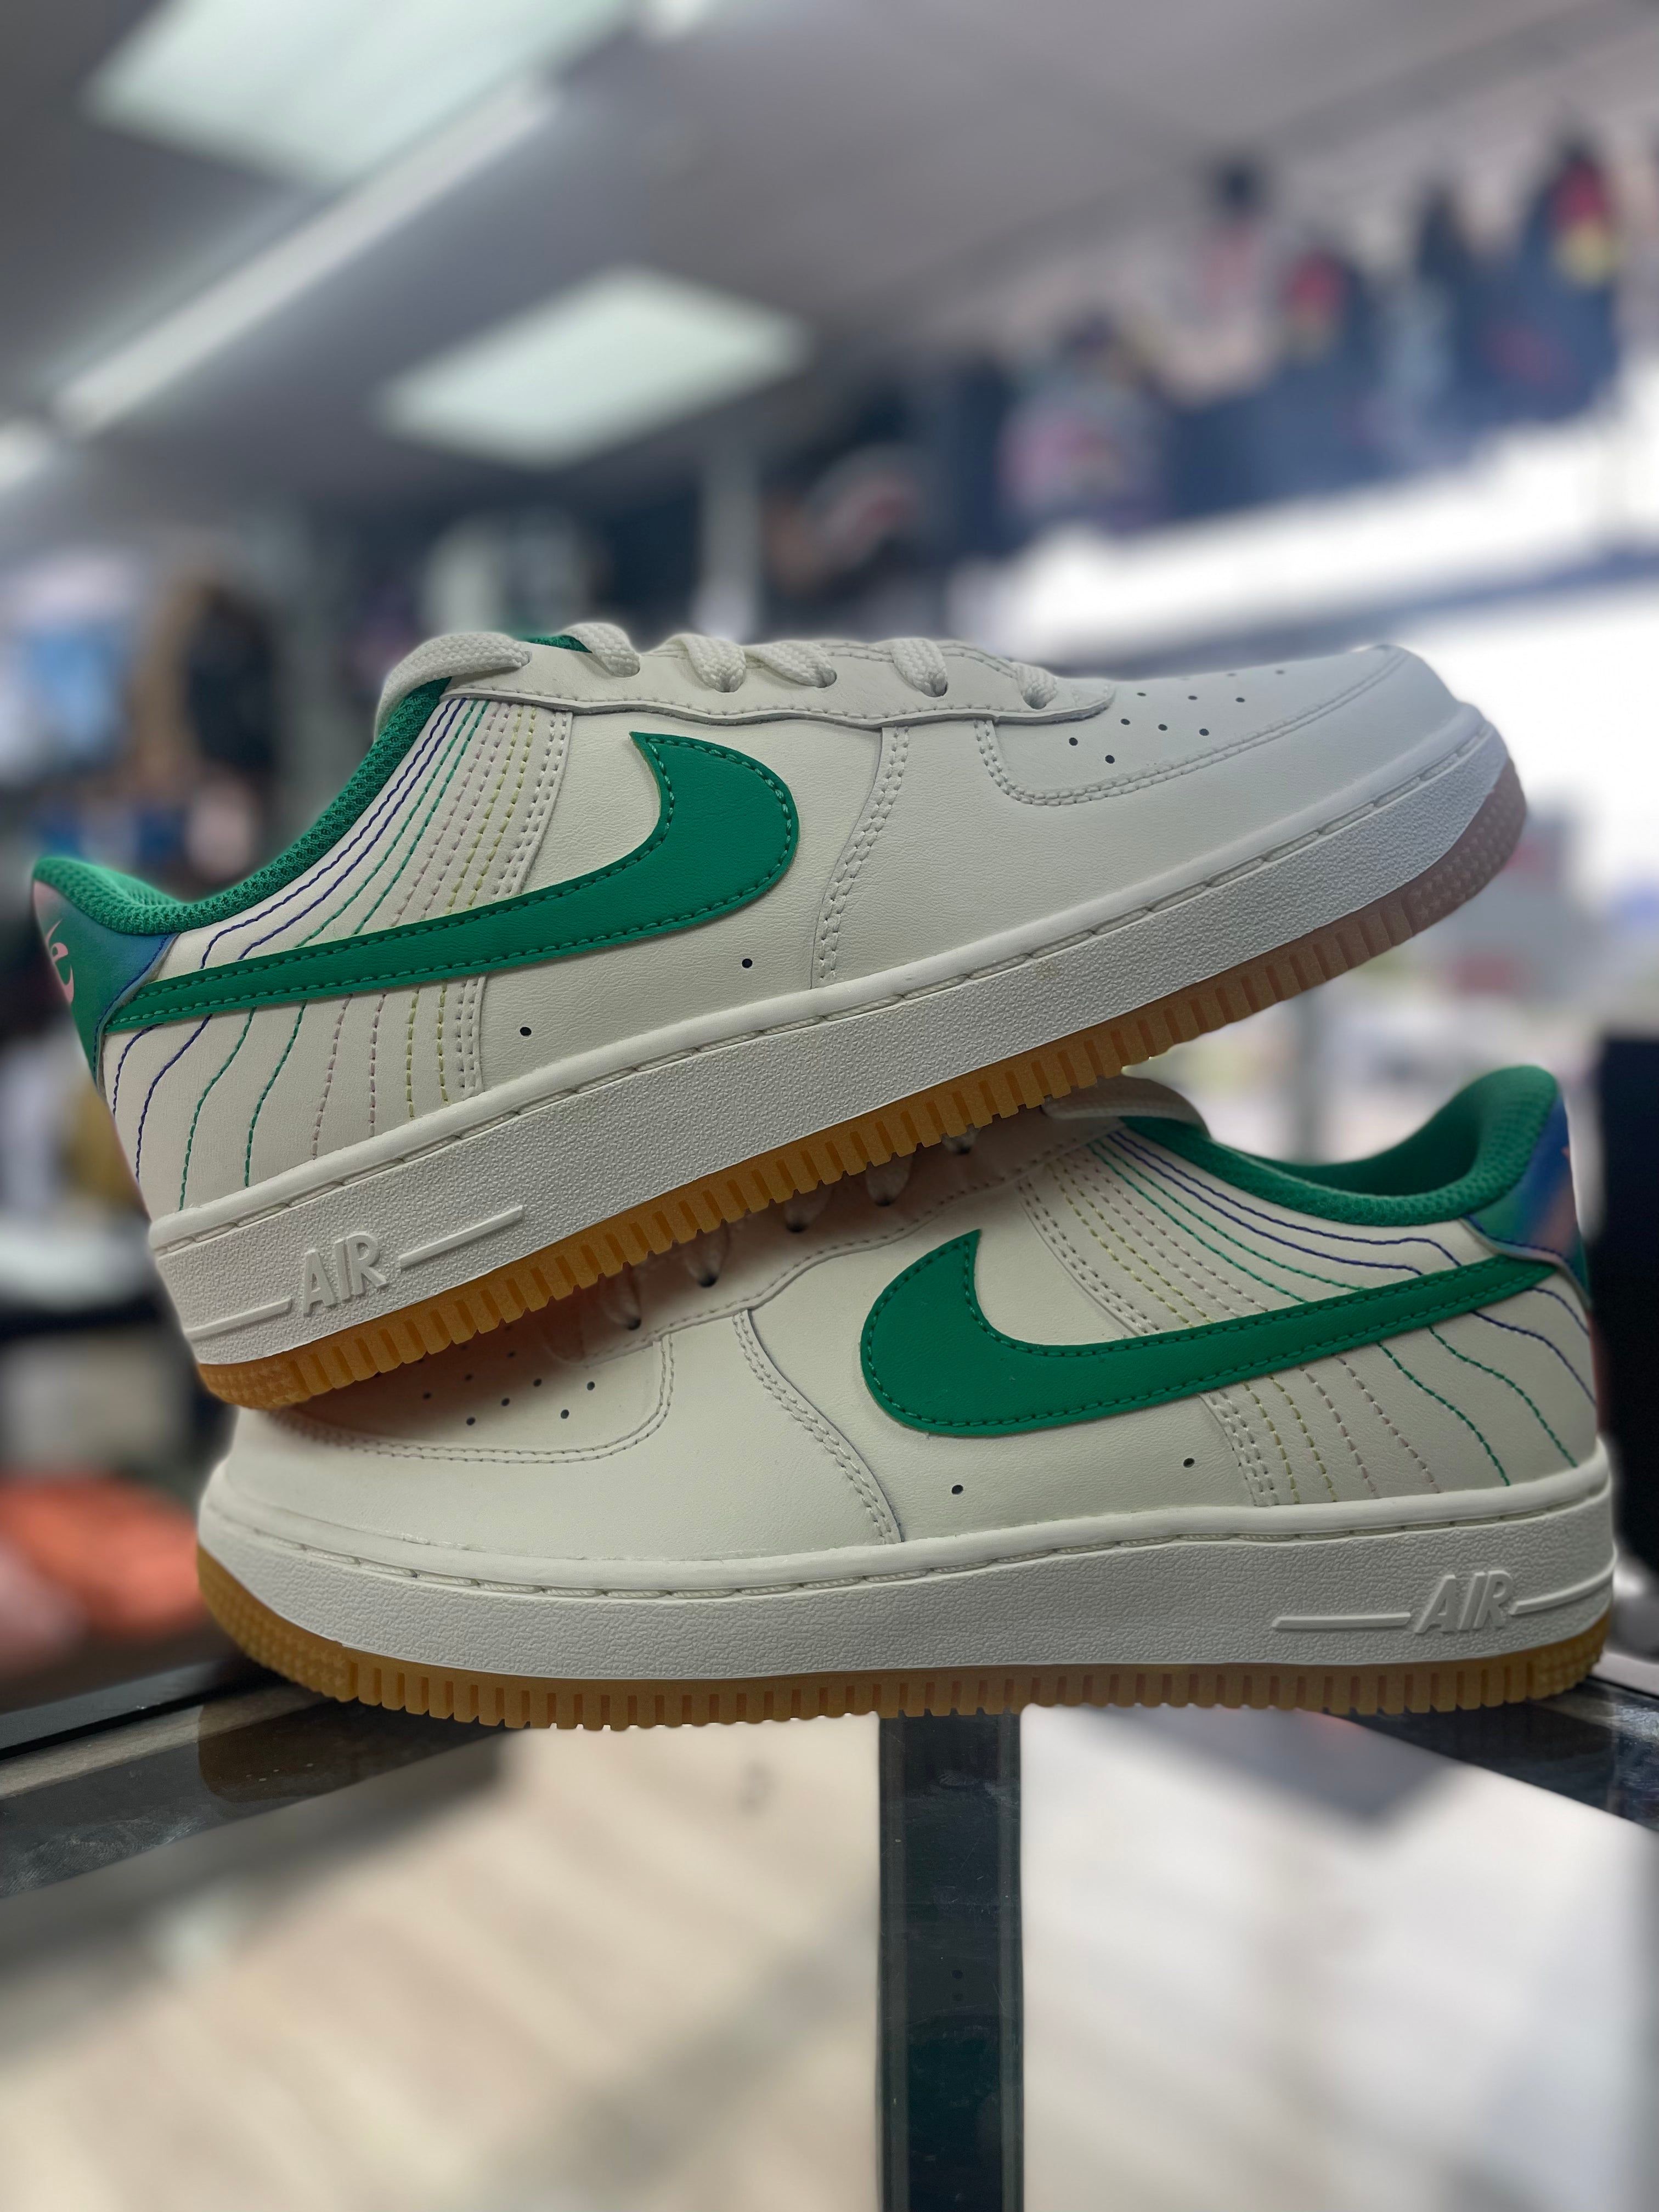 Nike Air Force 1 Low "Heel Stitch Sail" (GS)